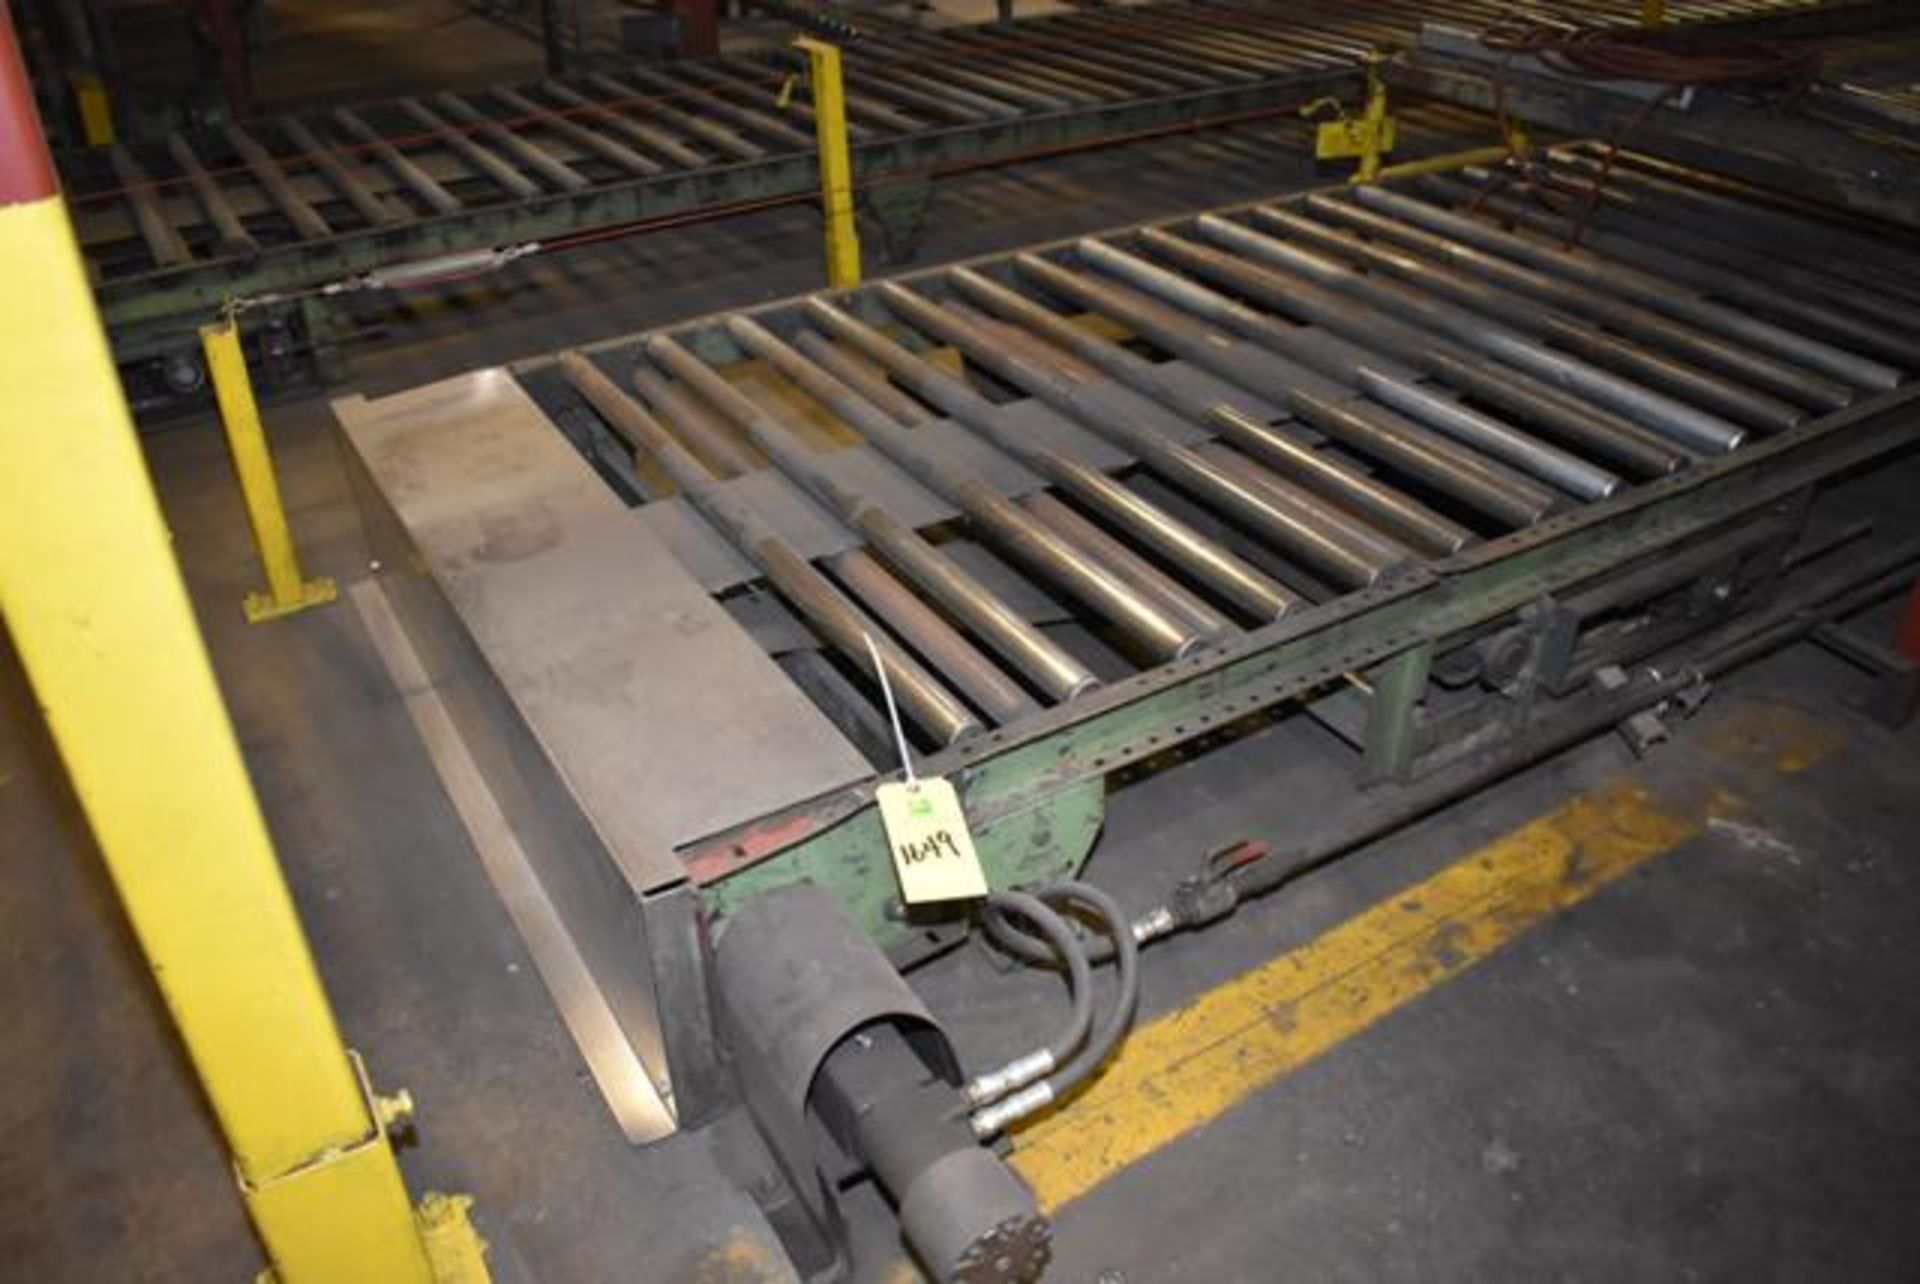 Motorized Roller Conveyor, 50" Rollers x Approx. 120' Length, RIGGING FEE: CONTACT RIGGER